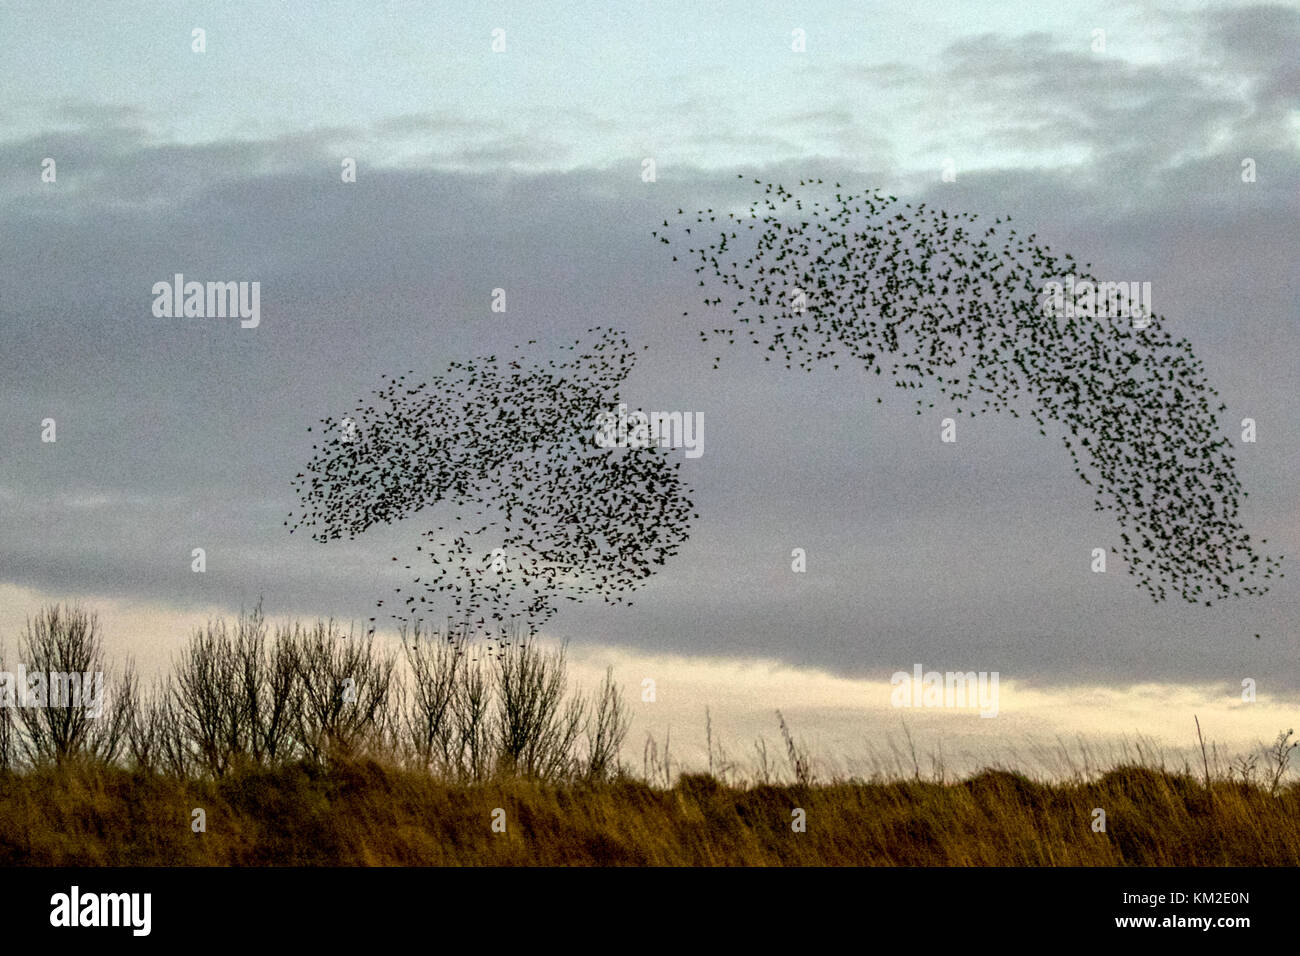 Burscough, Lancashire.  UK Weather. 3rd December, 2017. Thousands of starling seeking a communal roost in the reed beds at Martin Mere, are harried and pursed by a resident peregrine falcon.  The shapes and swirls form part of an evasive technique to survive and to confound and dazzle the bird of prey. The larger the simulated flocks, the harder it is for the predators to single out and catch an individual bird. Starlings can fly swiftly in coordinated and mesmerising formations as a group action to survive the attack. Credit: MediaWorldImages/AlamyLiveNews. Stock Photo